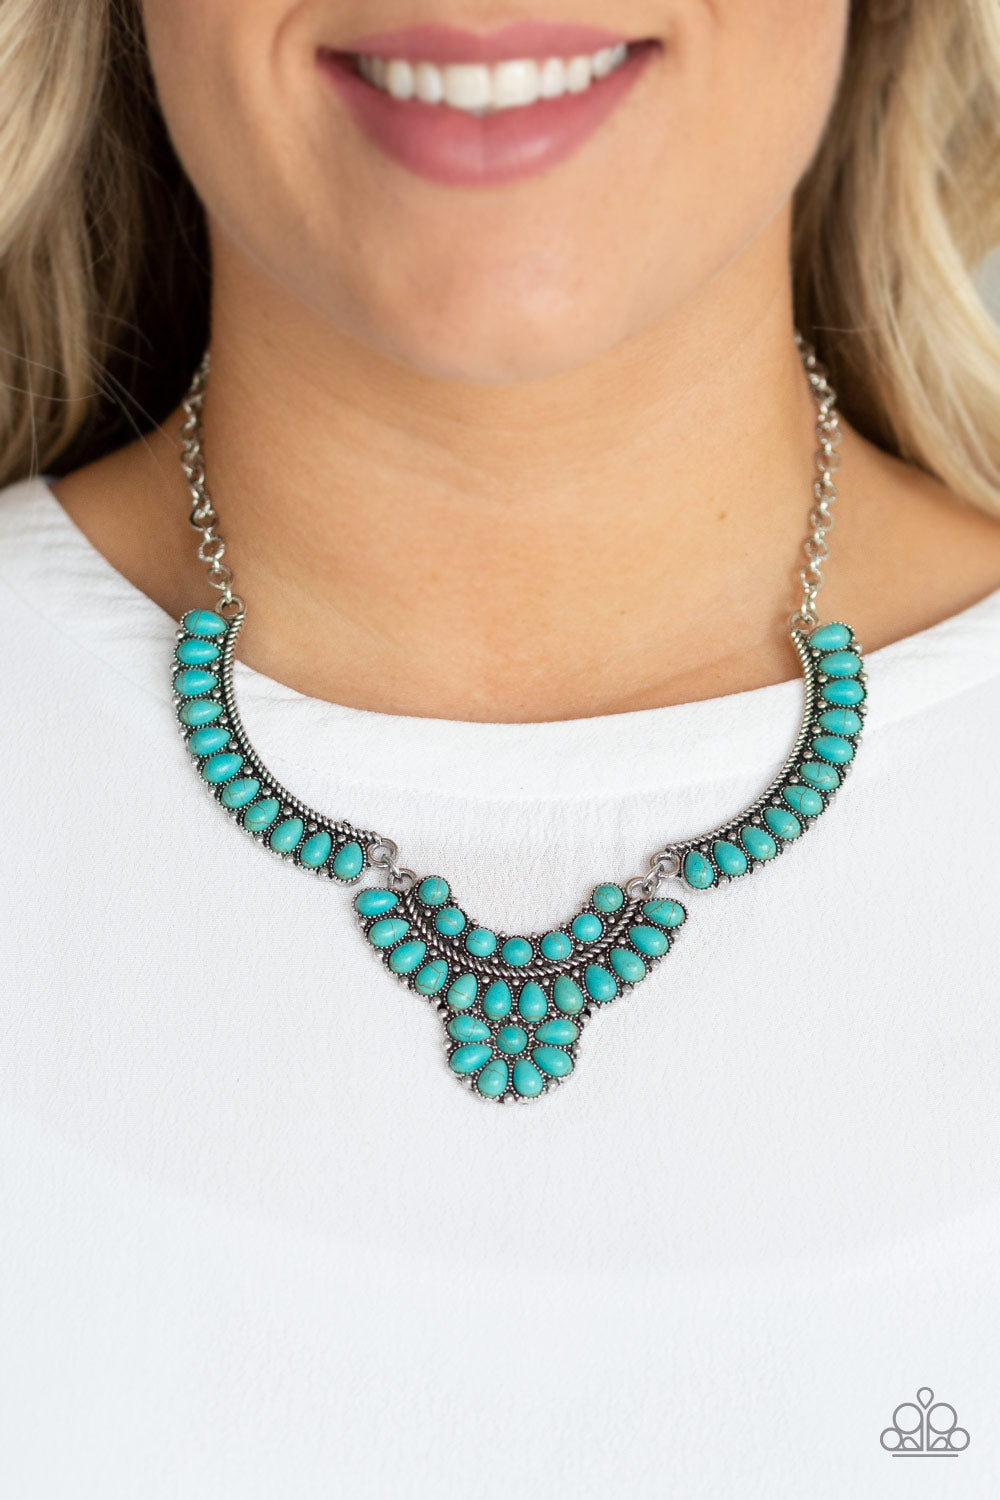 Paparazzi Accessories Omega Oasis - Blue Necklace & Earrings 